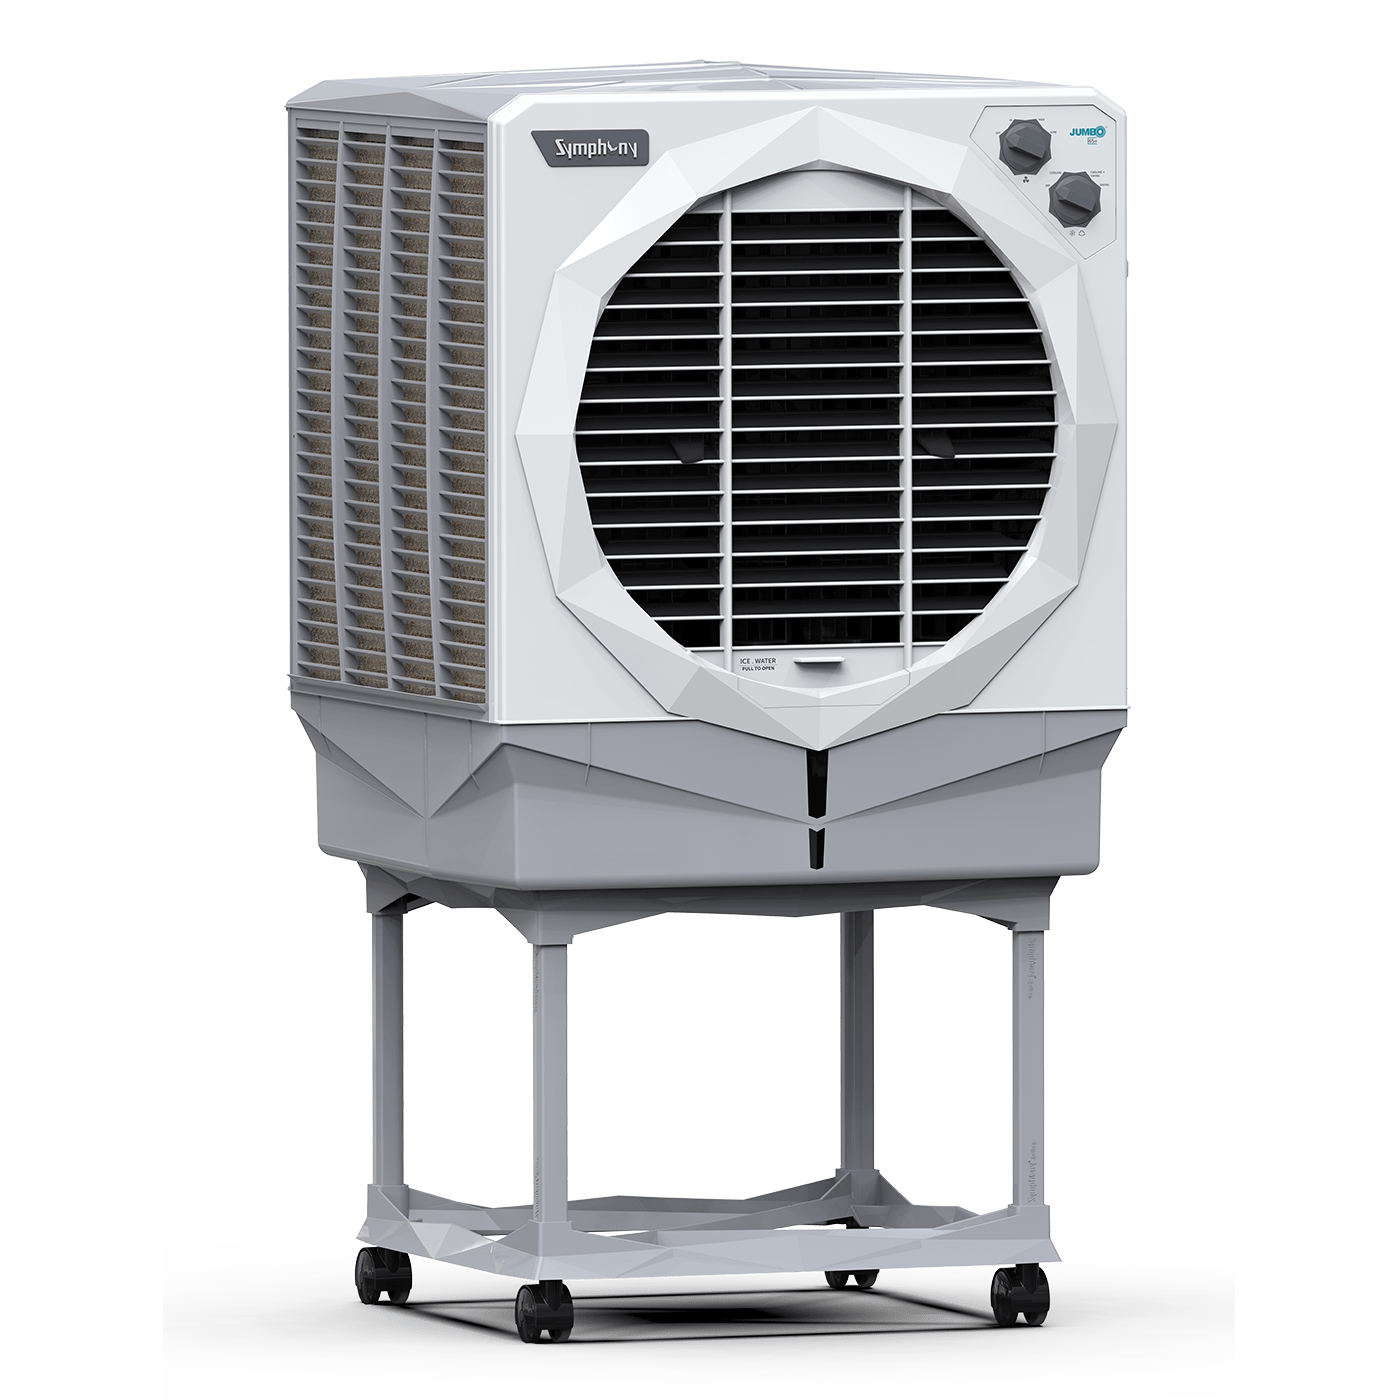 High-performance cooling with Jumbo 65Plus cooler